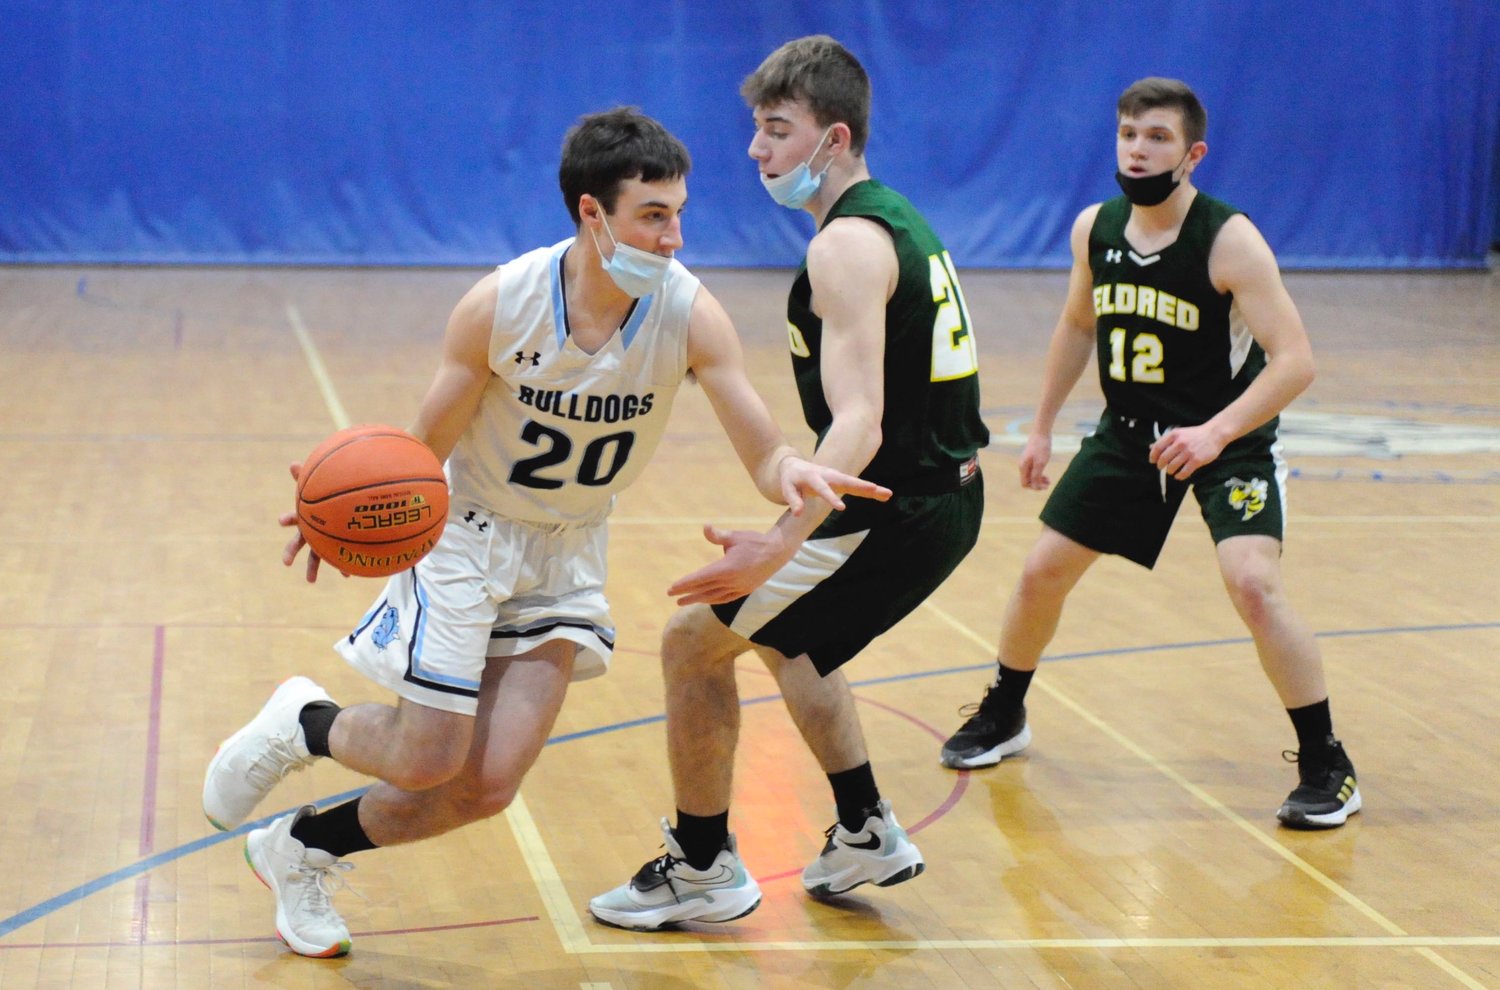 Cutting it close. Sullivan West’s Andrew Huber drives to the glass against Eldred’s Josh Warming and Matthew Ranaudo.